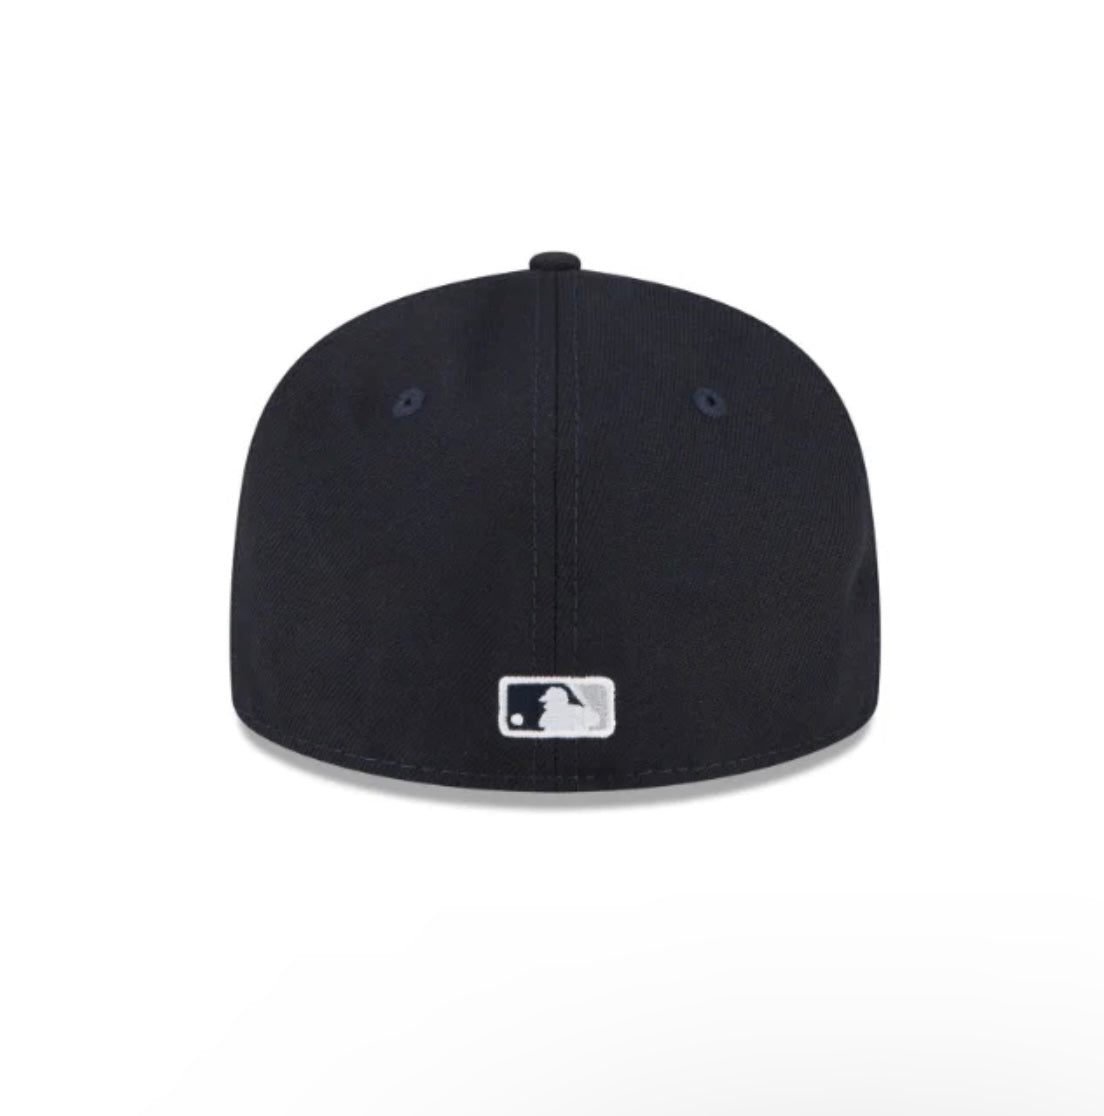 PAPER PLANES NEW YORK YANKEES (MLB X PAPER PLANES) "LIMITED" FITTED